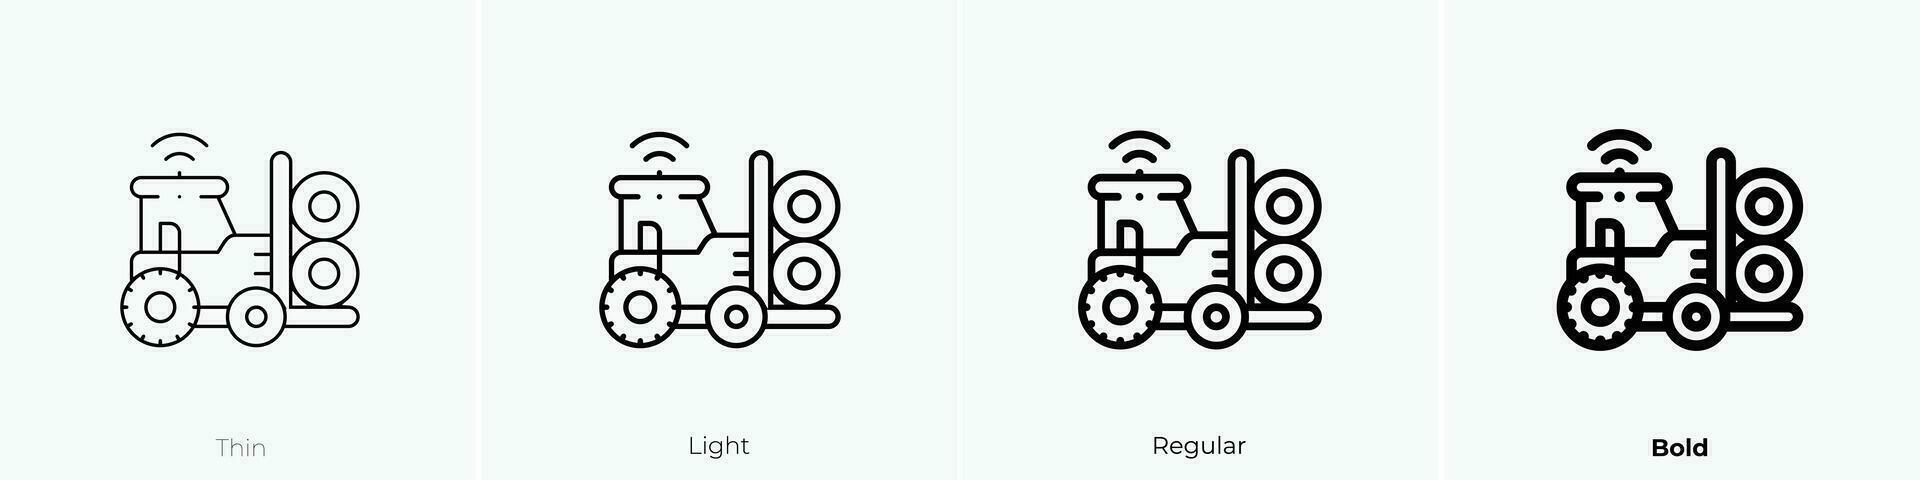 tractor icon. Thin, Light, Regular And Bold style design isolated on white background vector